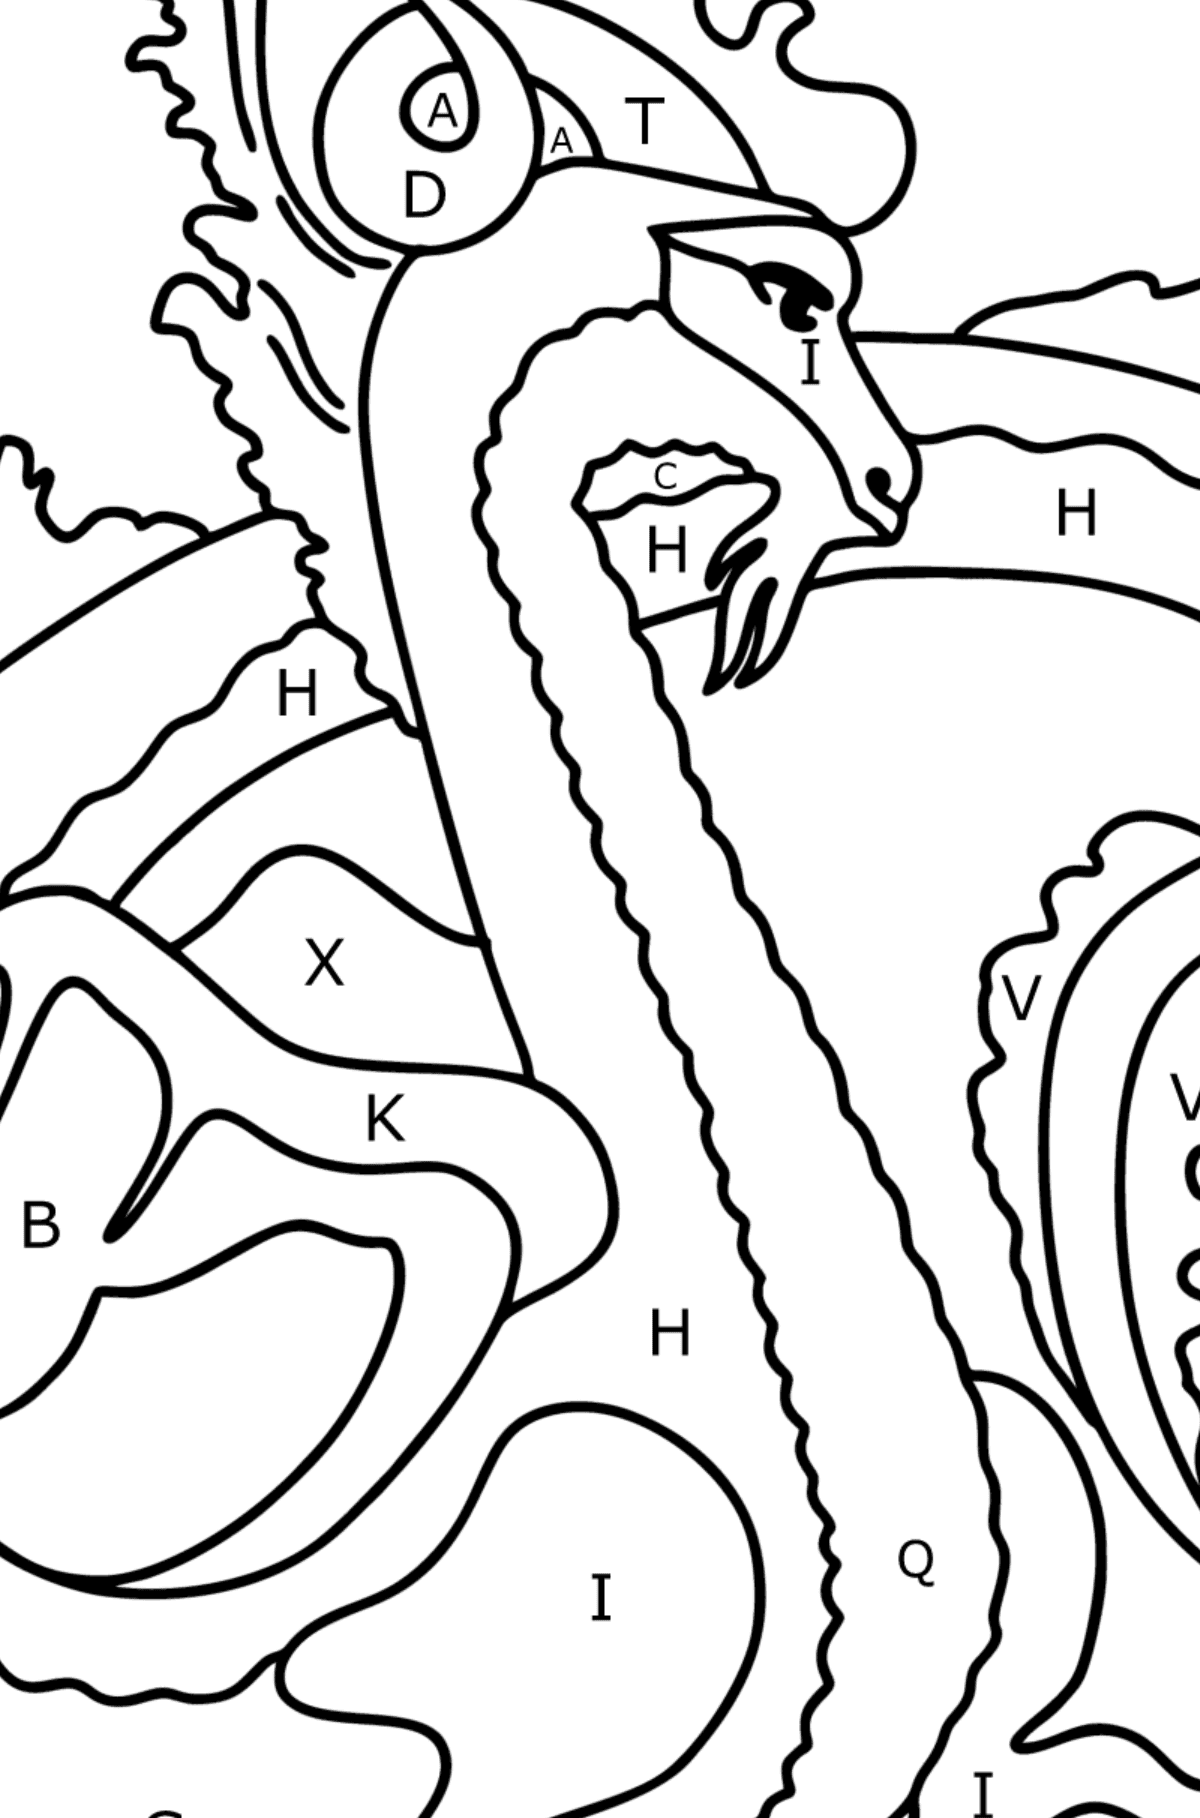 Mythical Dragon coloring page - Coloring by Letters for Kids